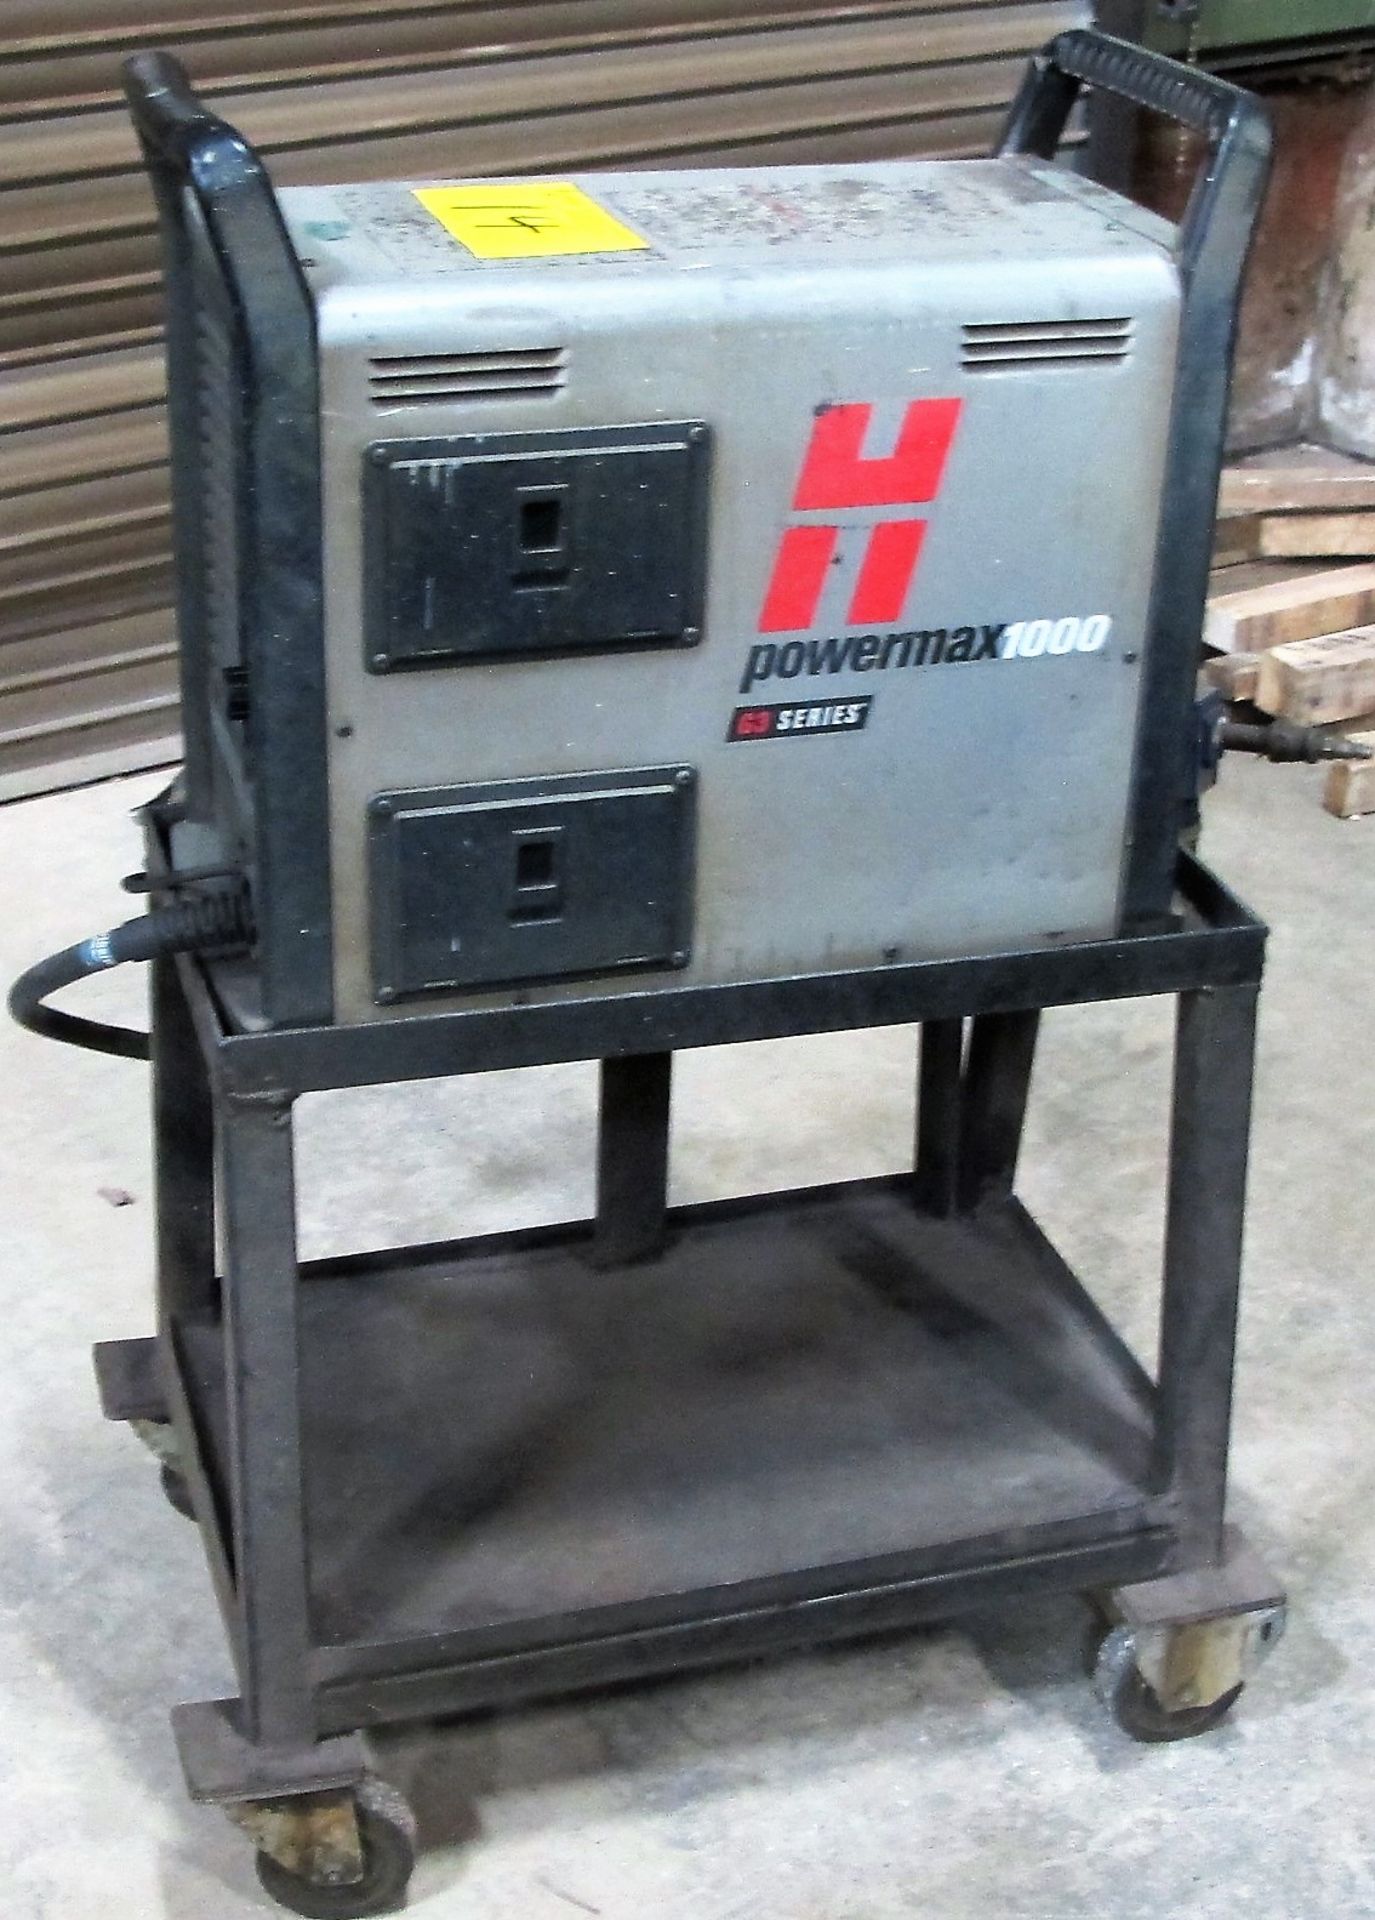 HYPERTHERM POWERMAX 1000, G3 SERIES, PLASMA CUTTER, S/N1000-031278 W/CABLES/CART - Image 3 of 3